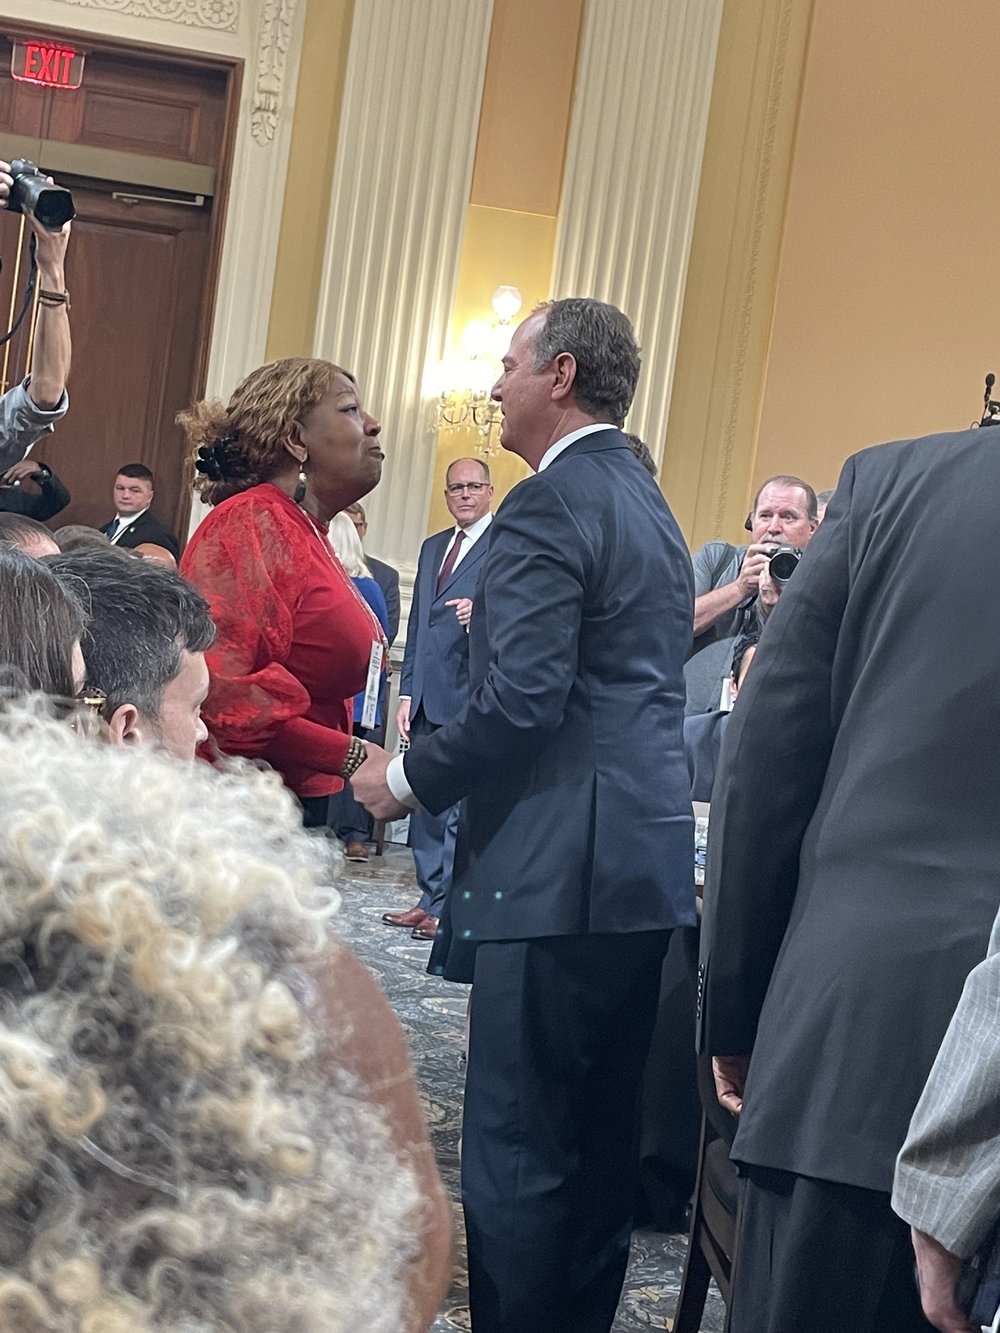 Election worker Ruby Freeman shakes hands with Rep. Adam Schiff at January 6th hearing